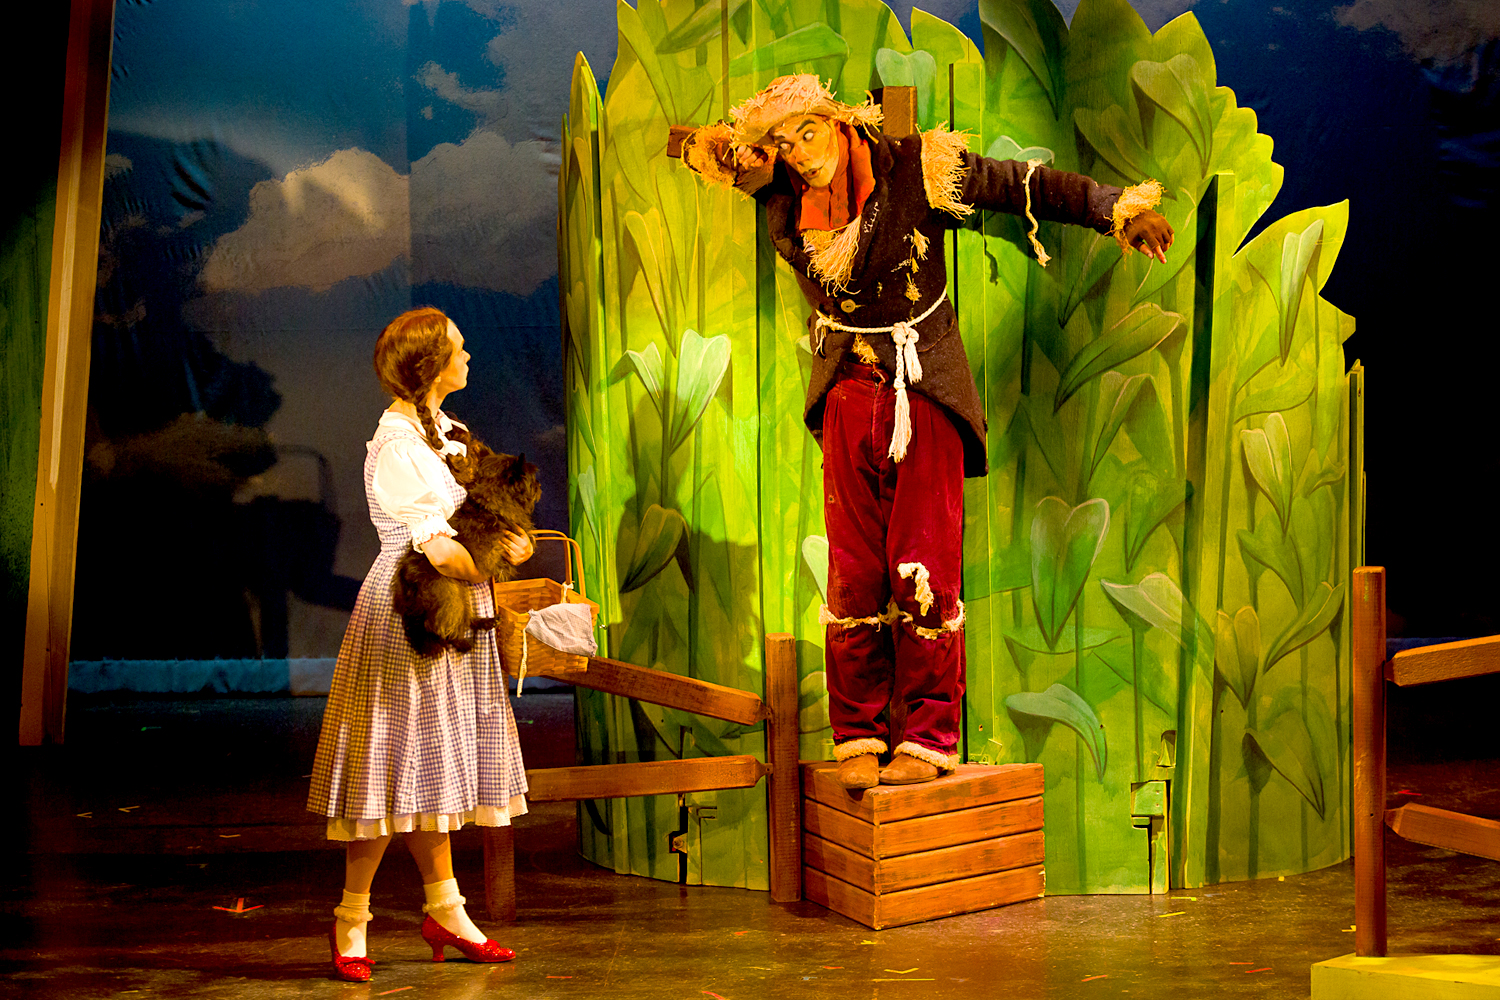 The Wizard of Oz - Theatrical.